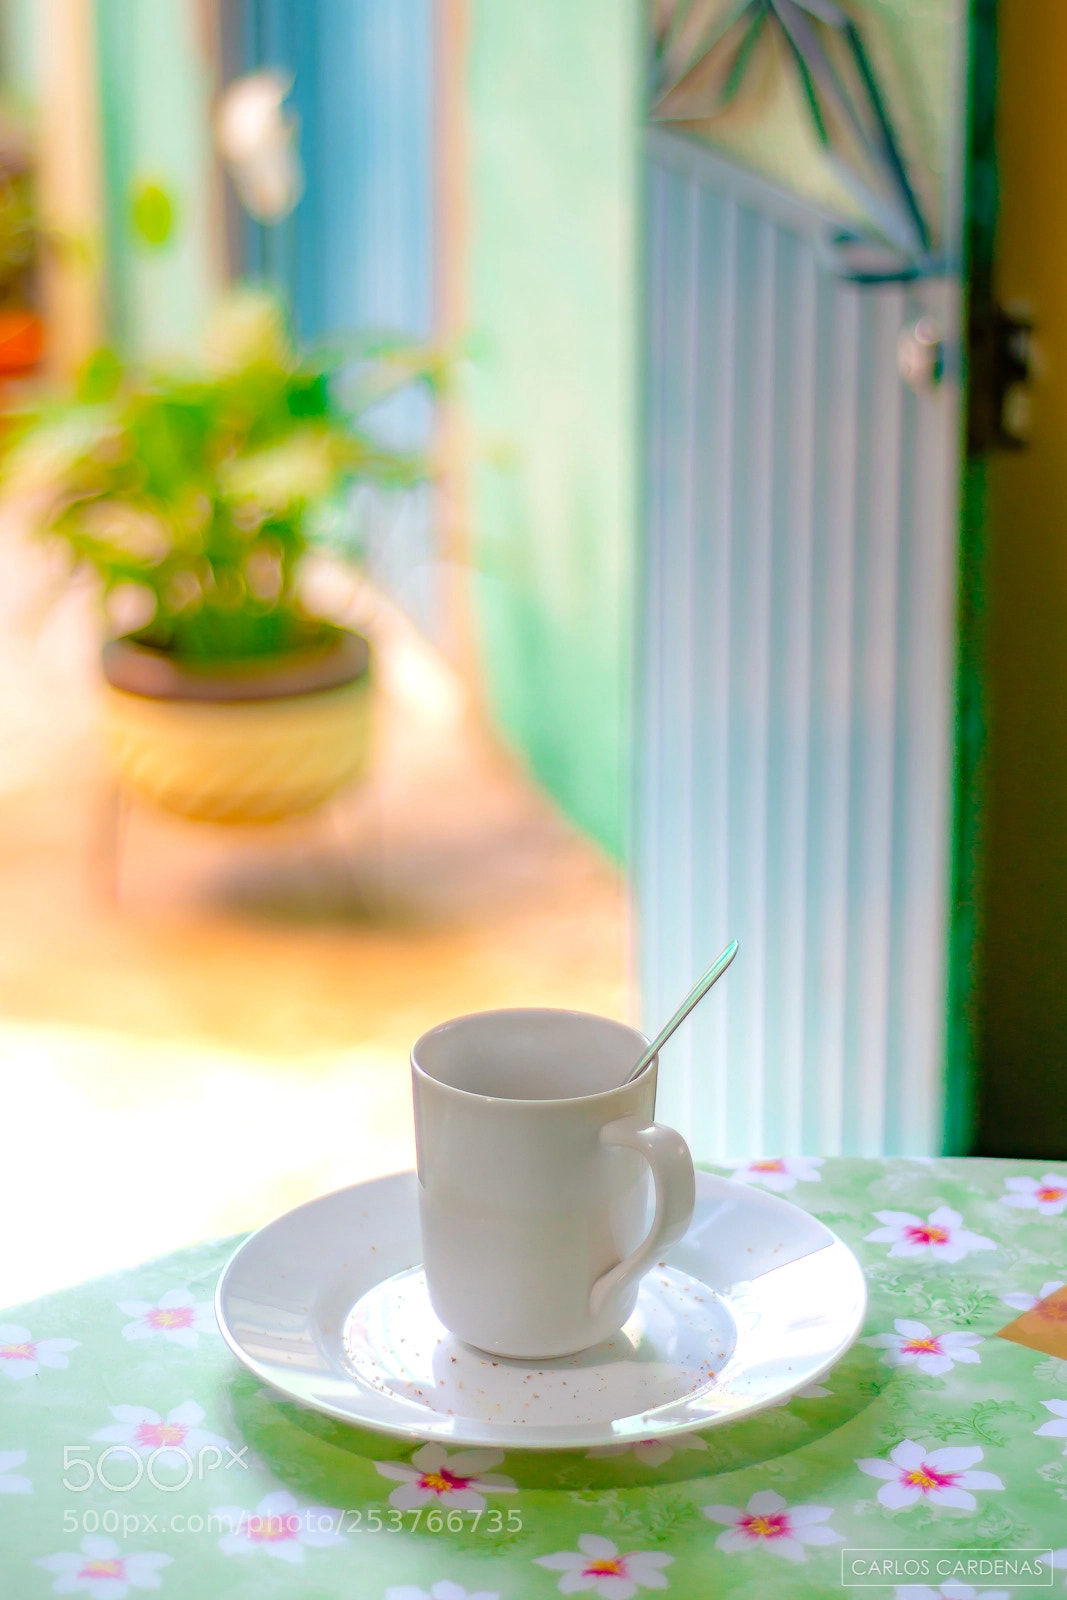 Nikon D7100 sample photo. After breakfast photography